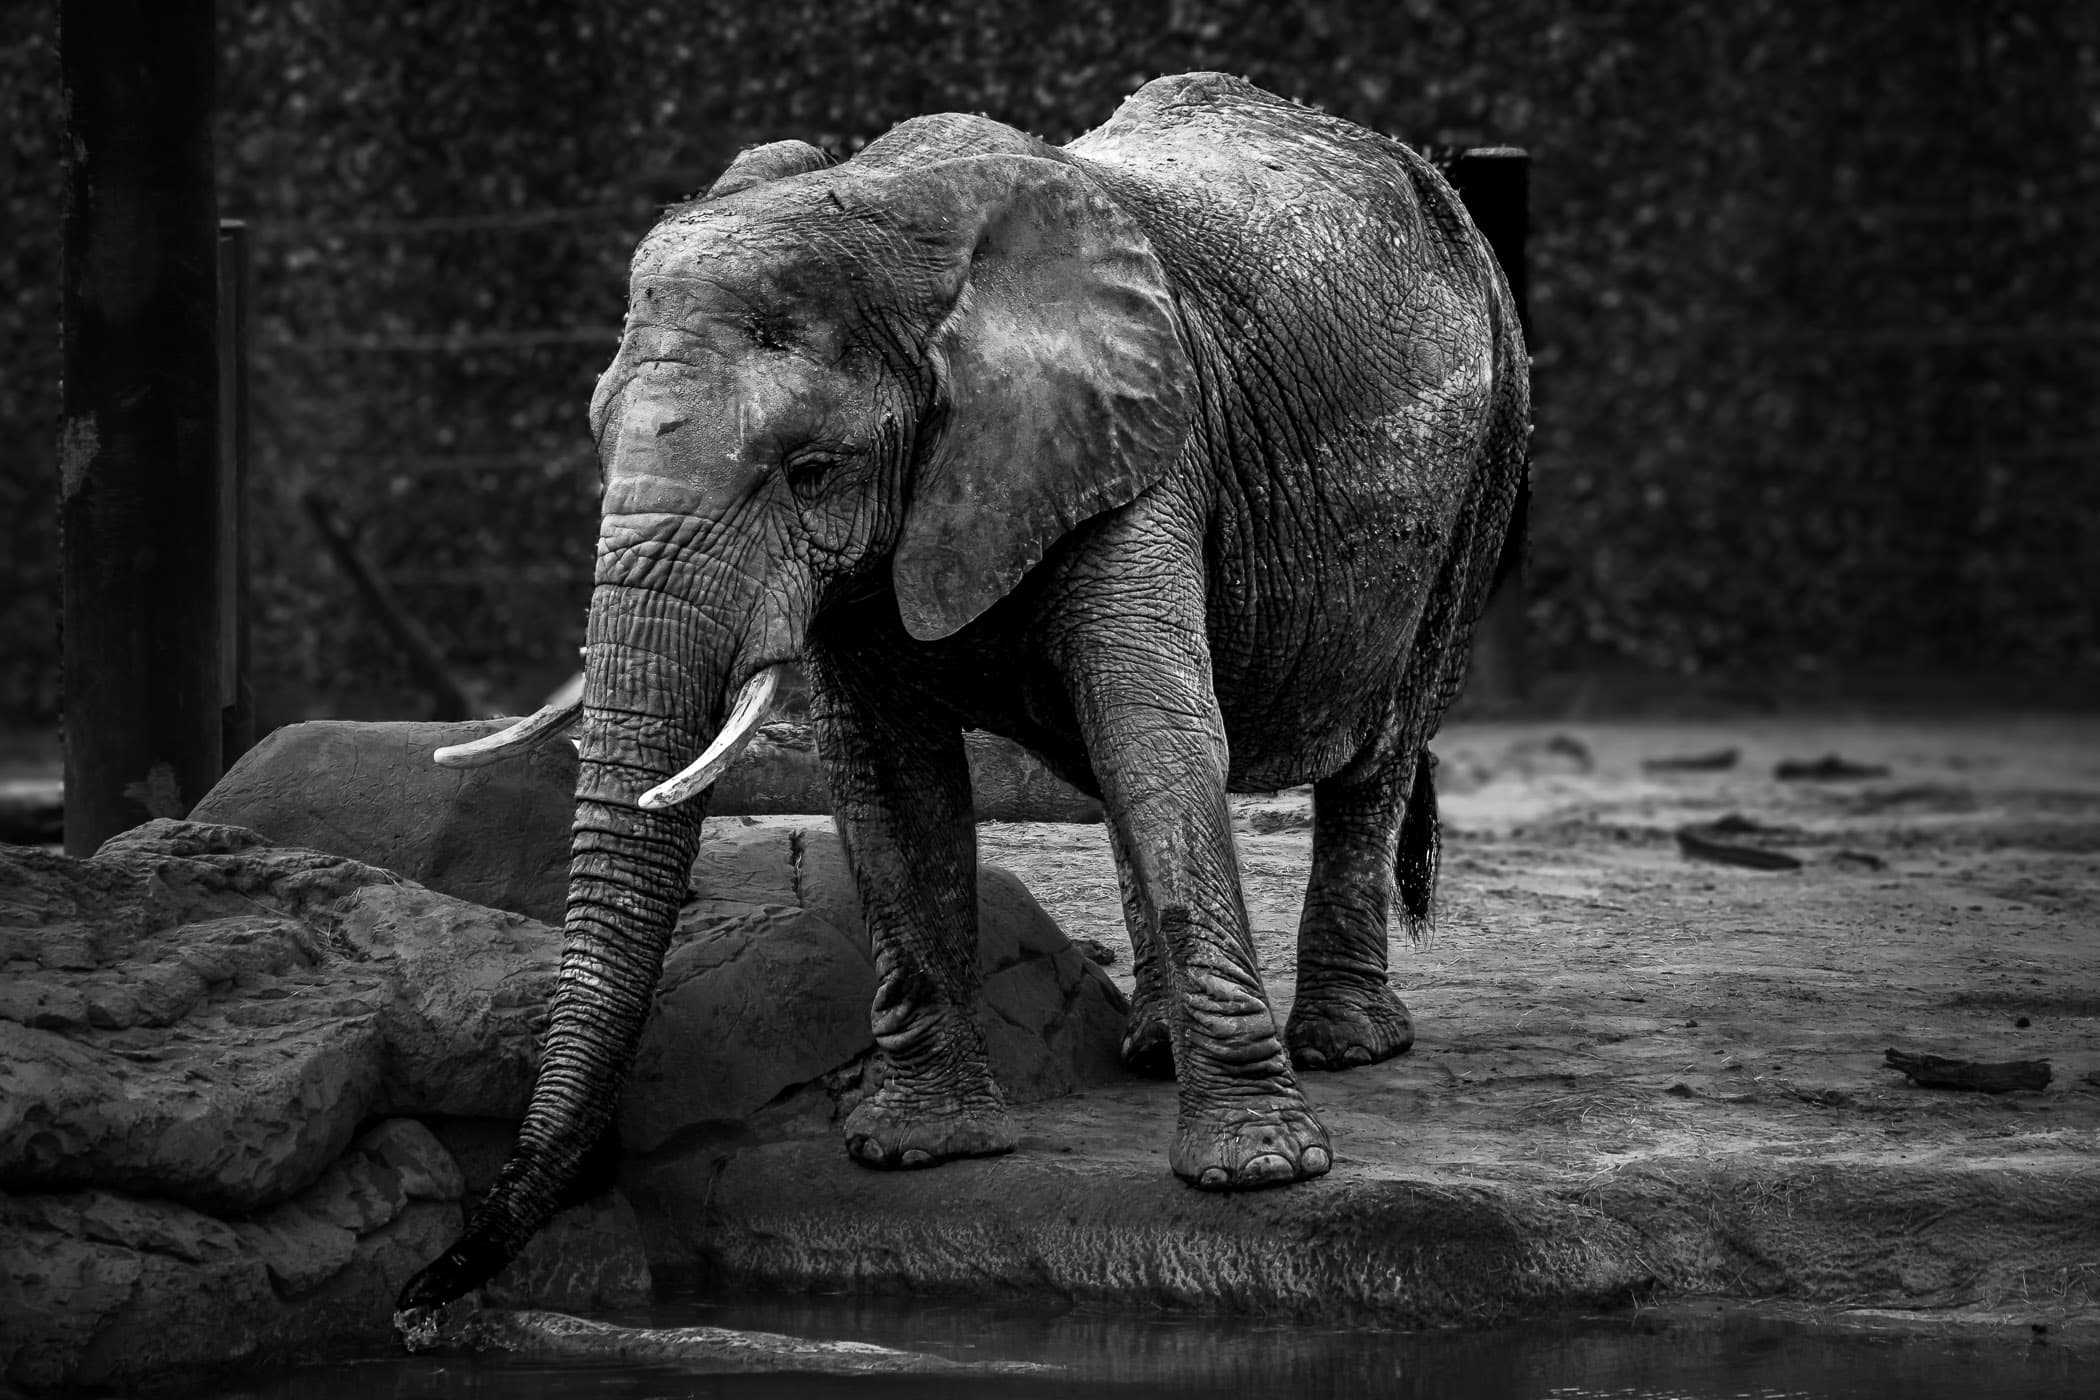 An elephant at Tyler, Texas' Caldwell Zoo pauses to take a drink of water.